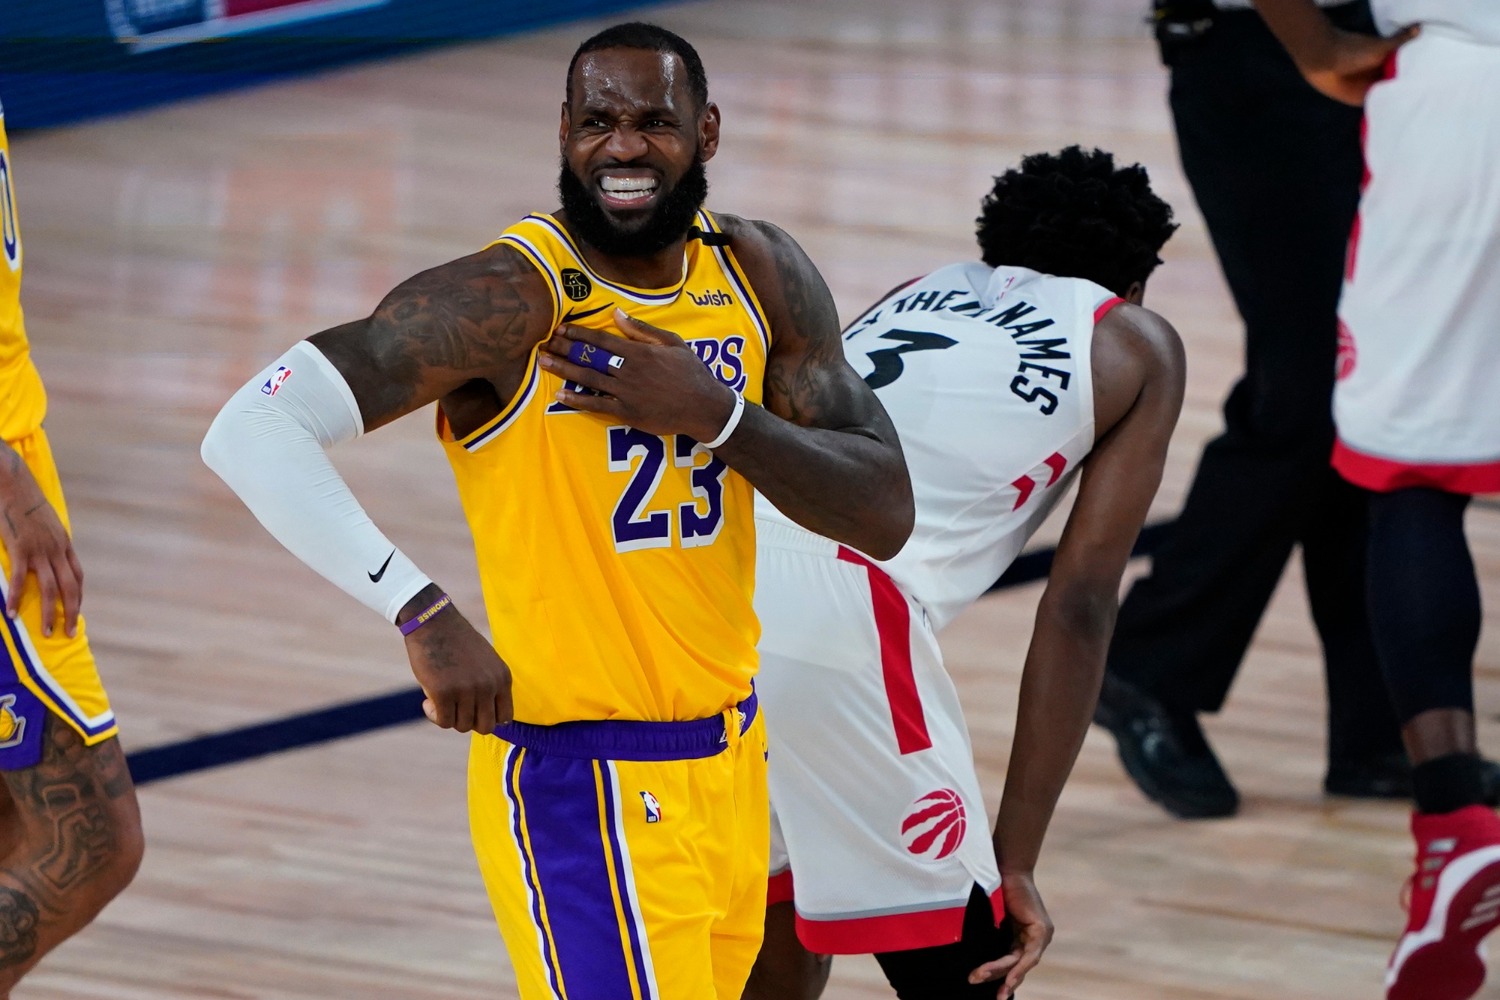 LeBron James faces his toughest challenge yet with the LA Lakers